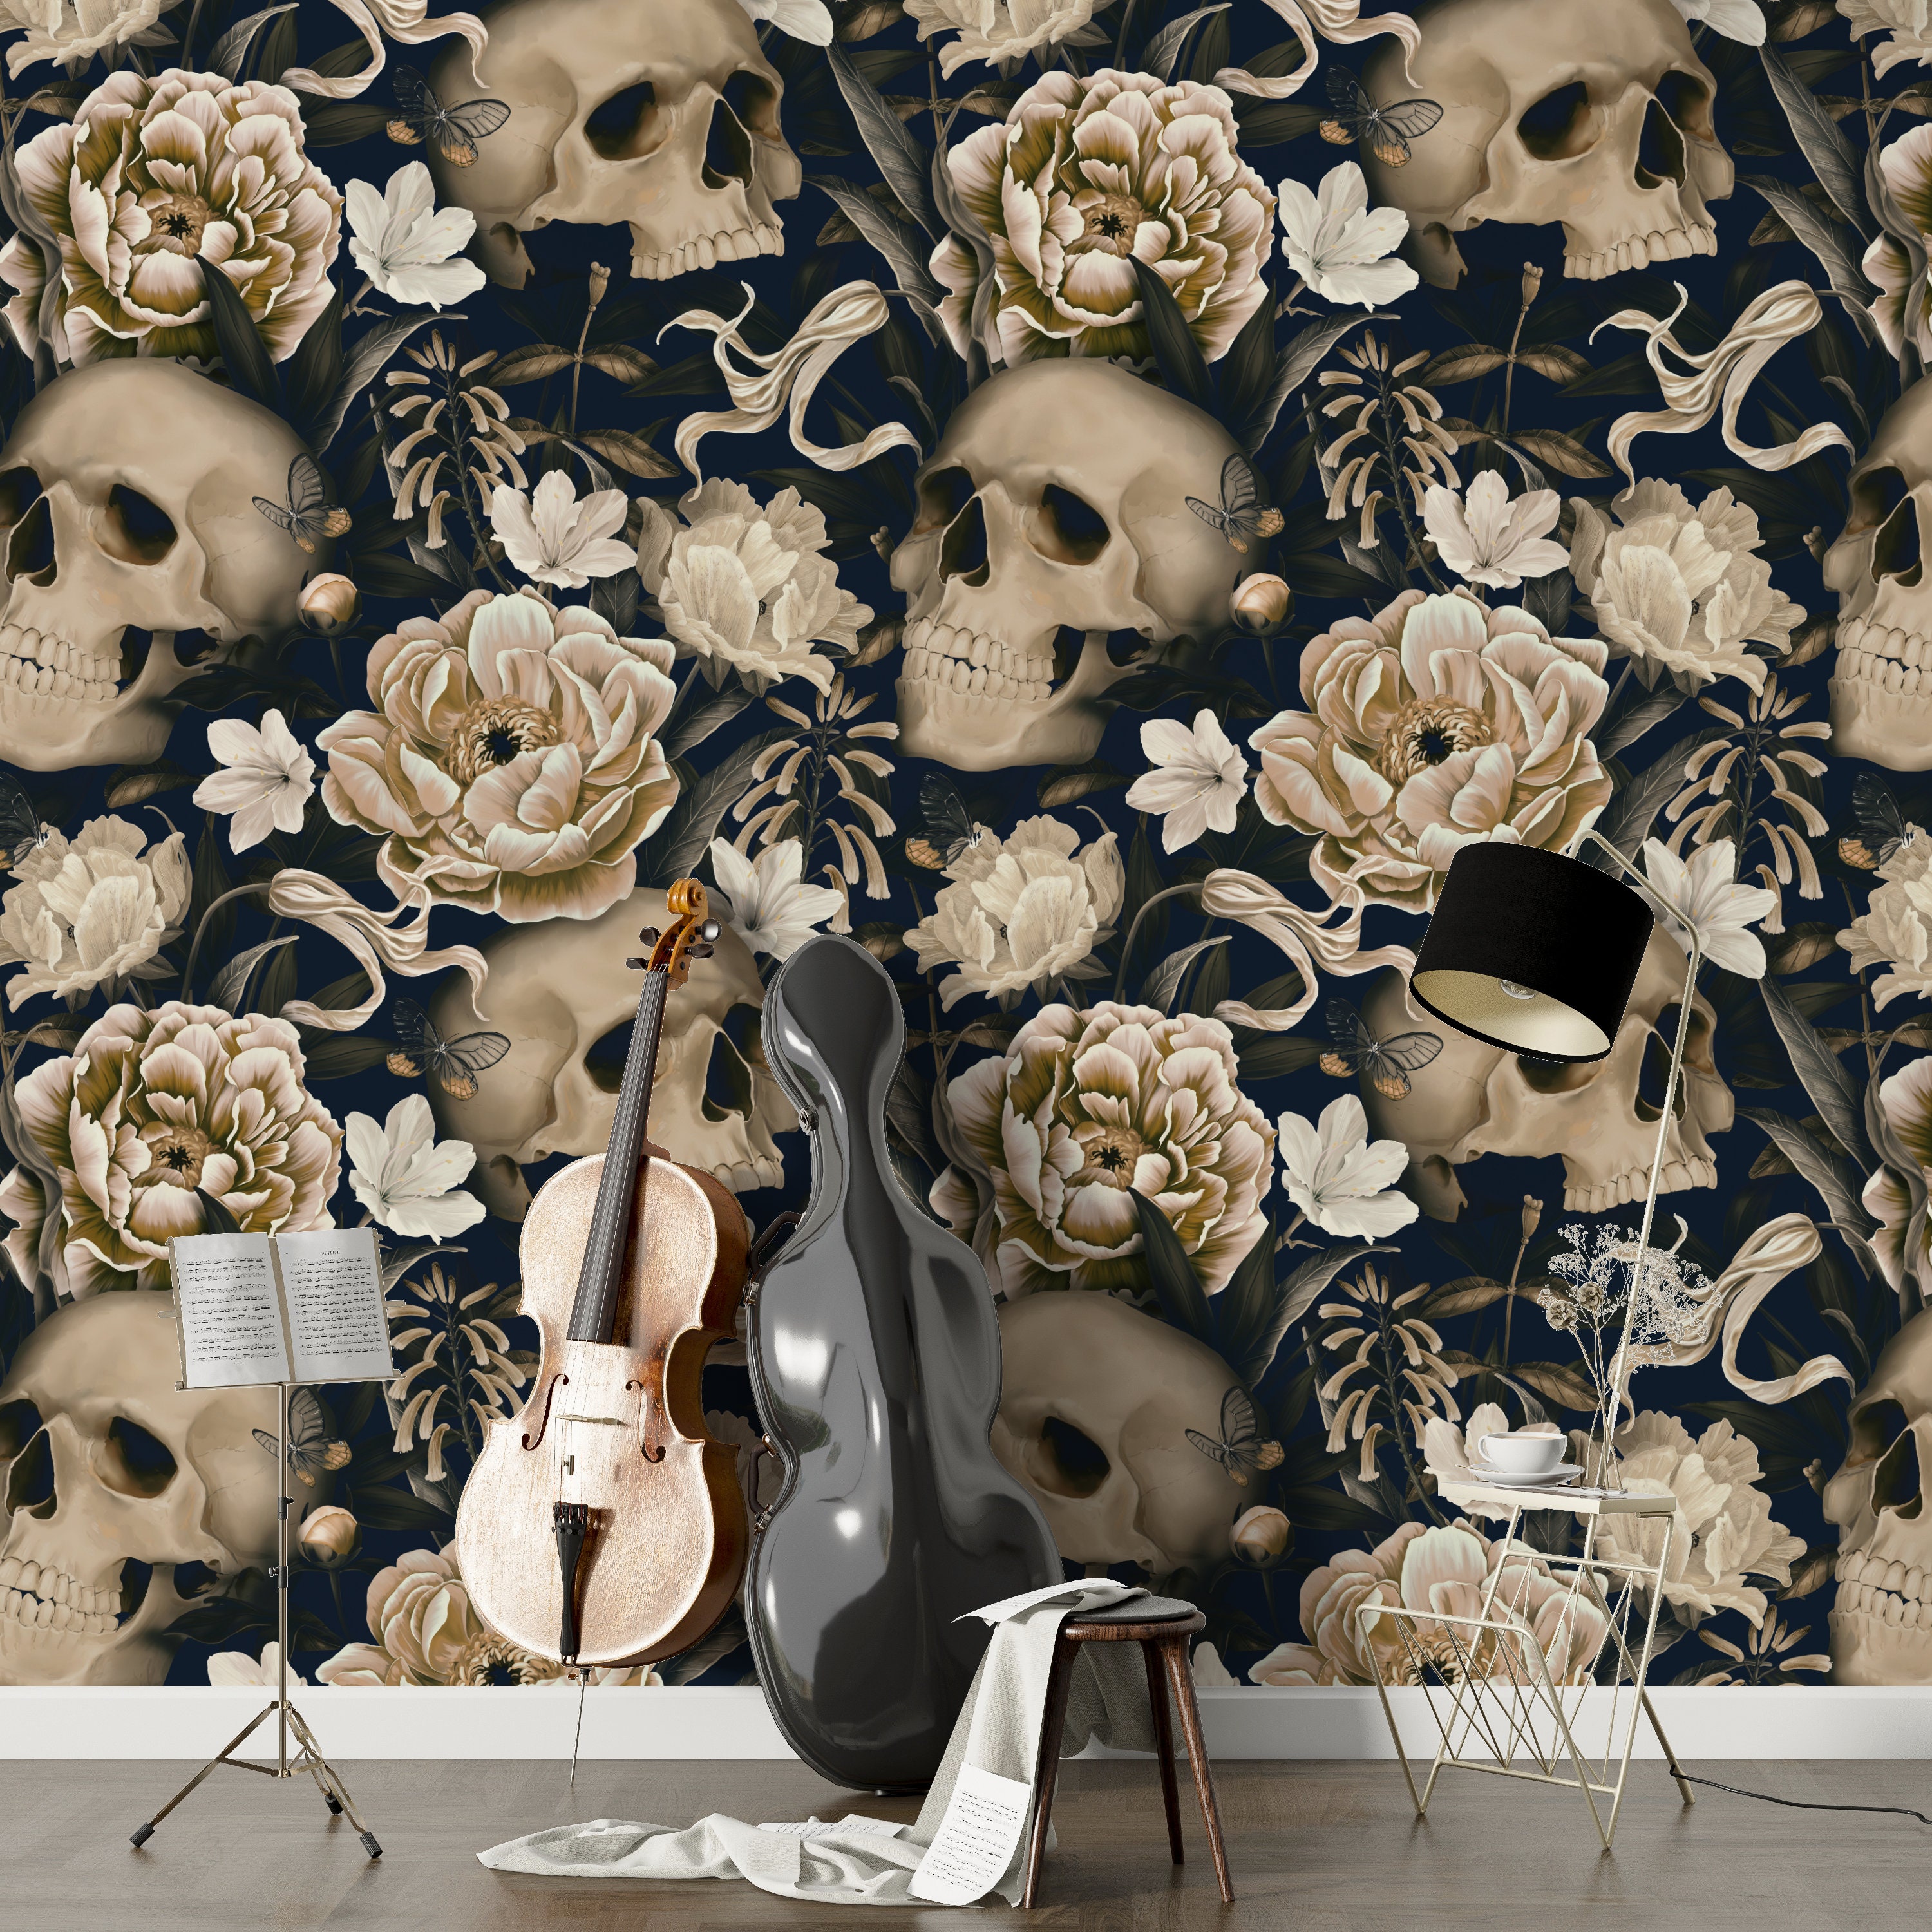 Dark Floral With Skull Wallpaper Gothic Flower Wall Mural image